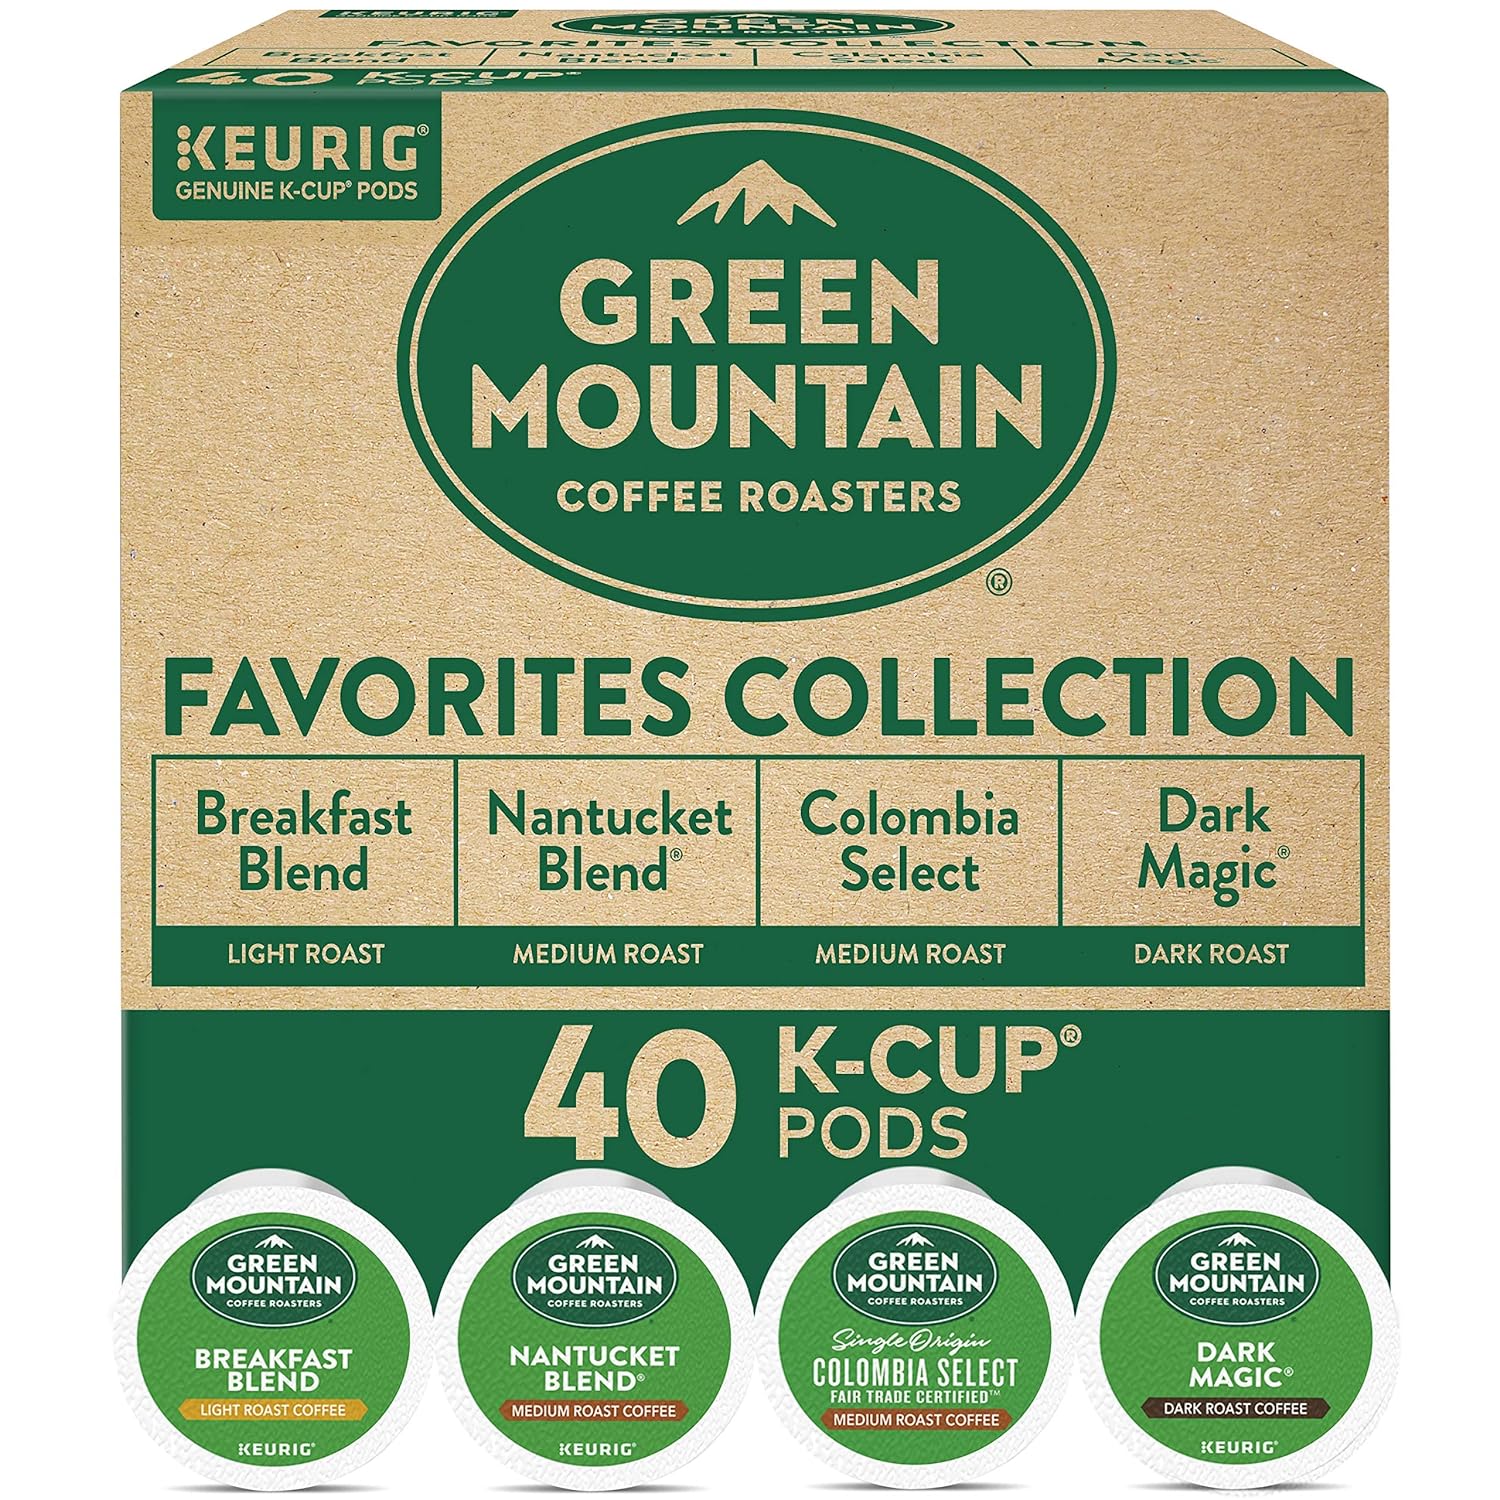 Keurig Green Mountain Coffee Roaster Coffee Roasters Favorites Collection, Single-Serve Coffee K-Cup Pods, Variety, 40 Count